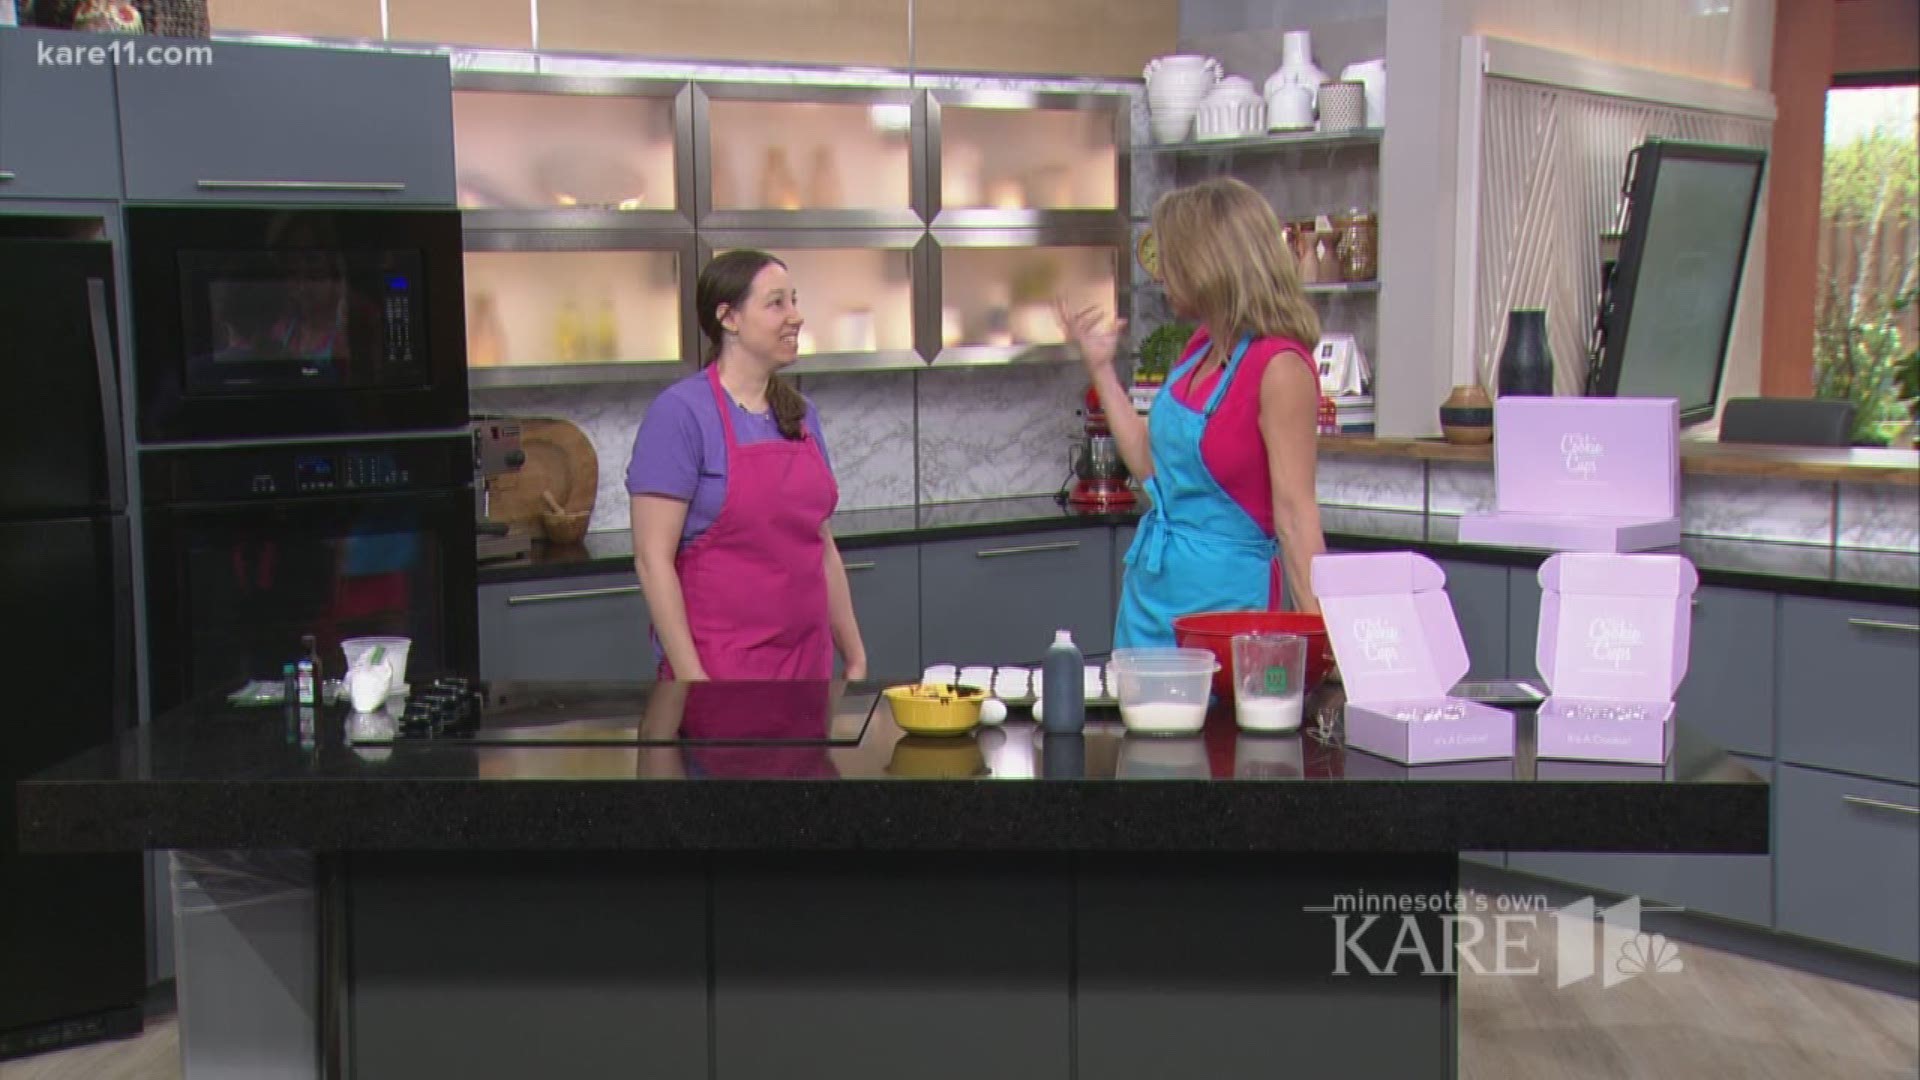 Nicole Pomije joins Kare 11 to share her cookie cupcakes, her signature dessert at her new bakery, The Cookie Cup.